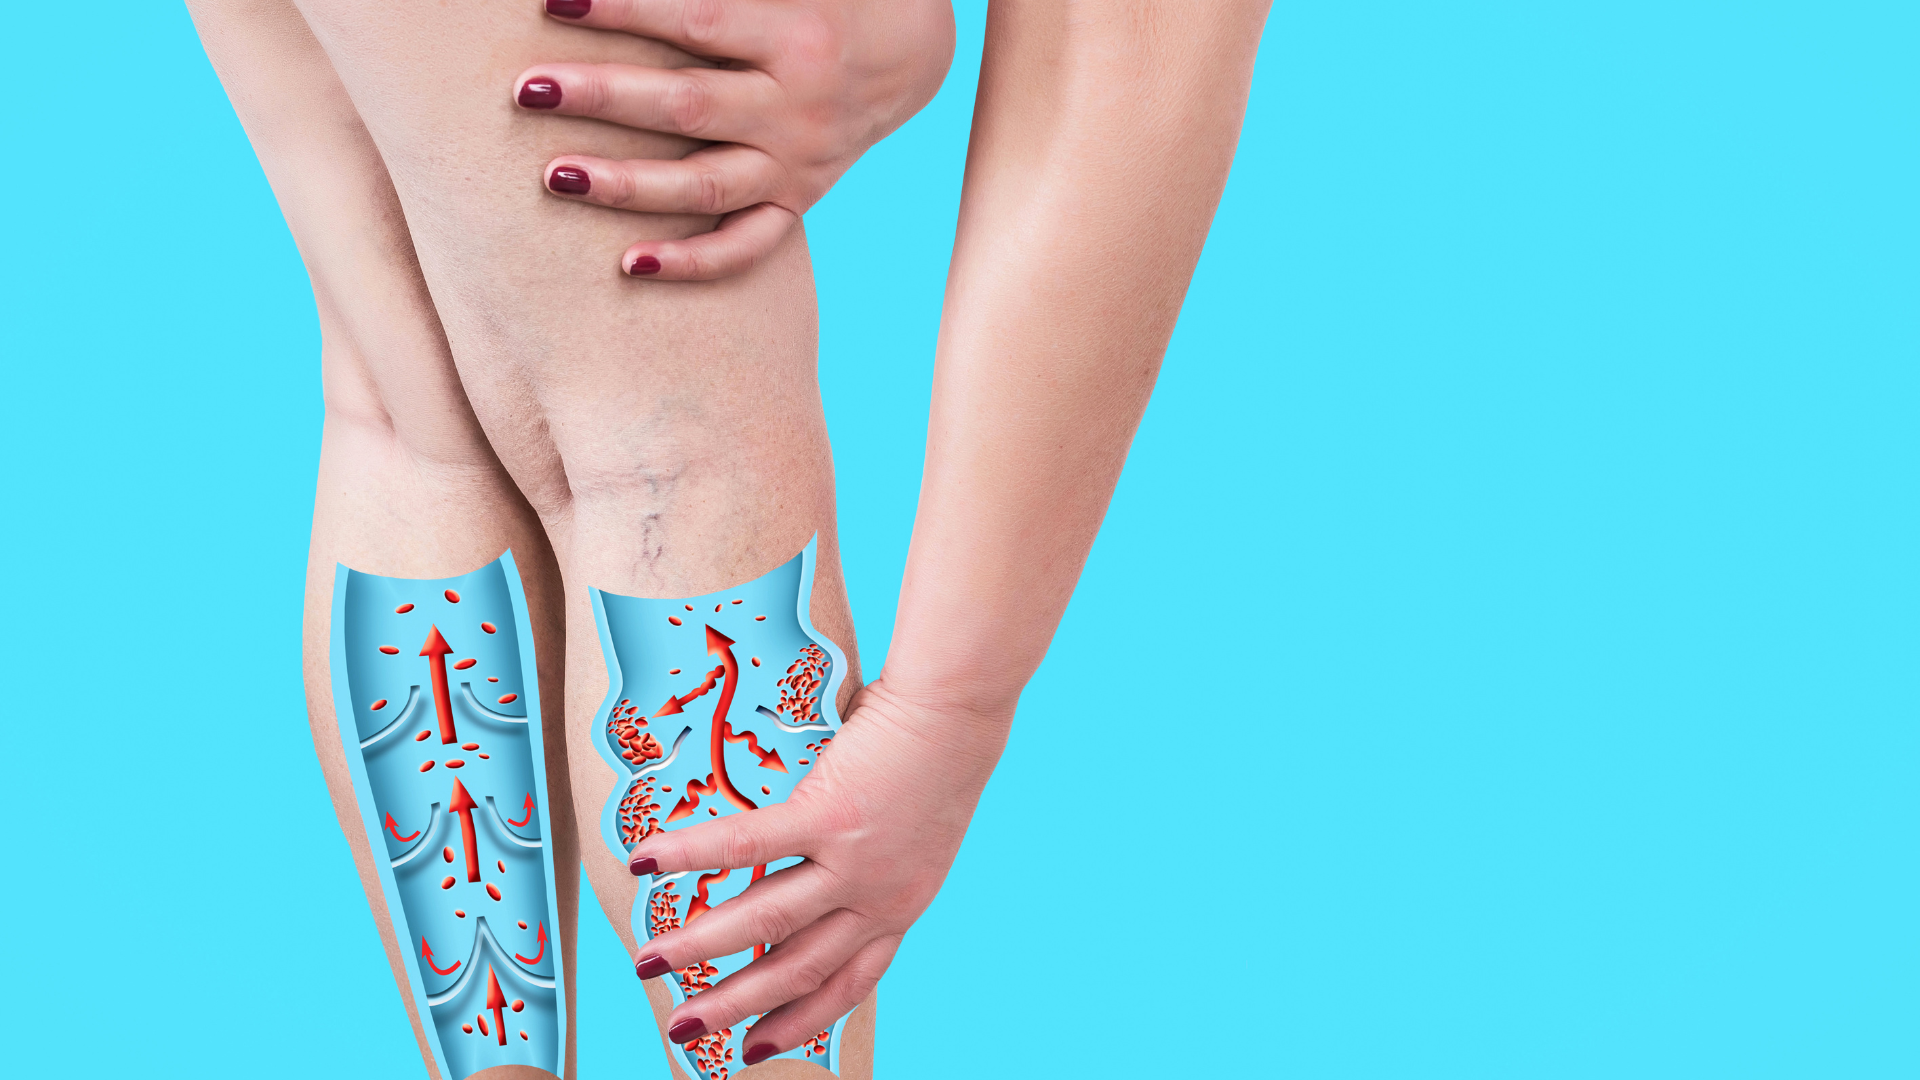 When Is the Best Time to Treat Varicose Veins?